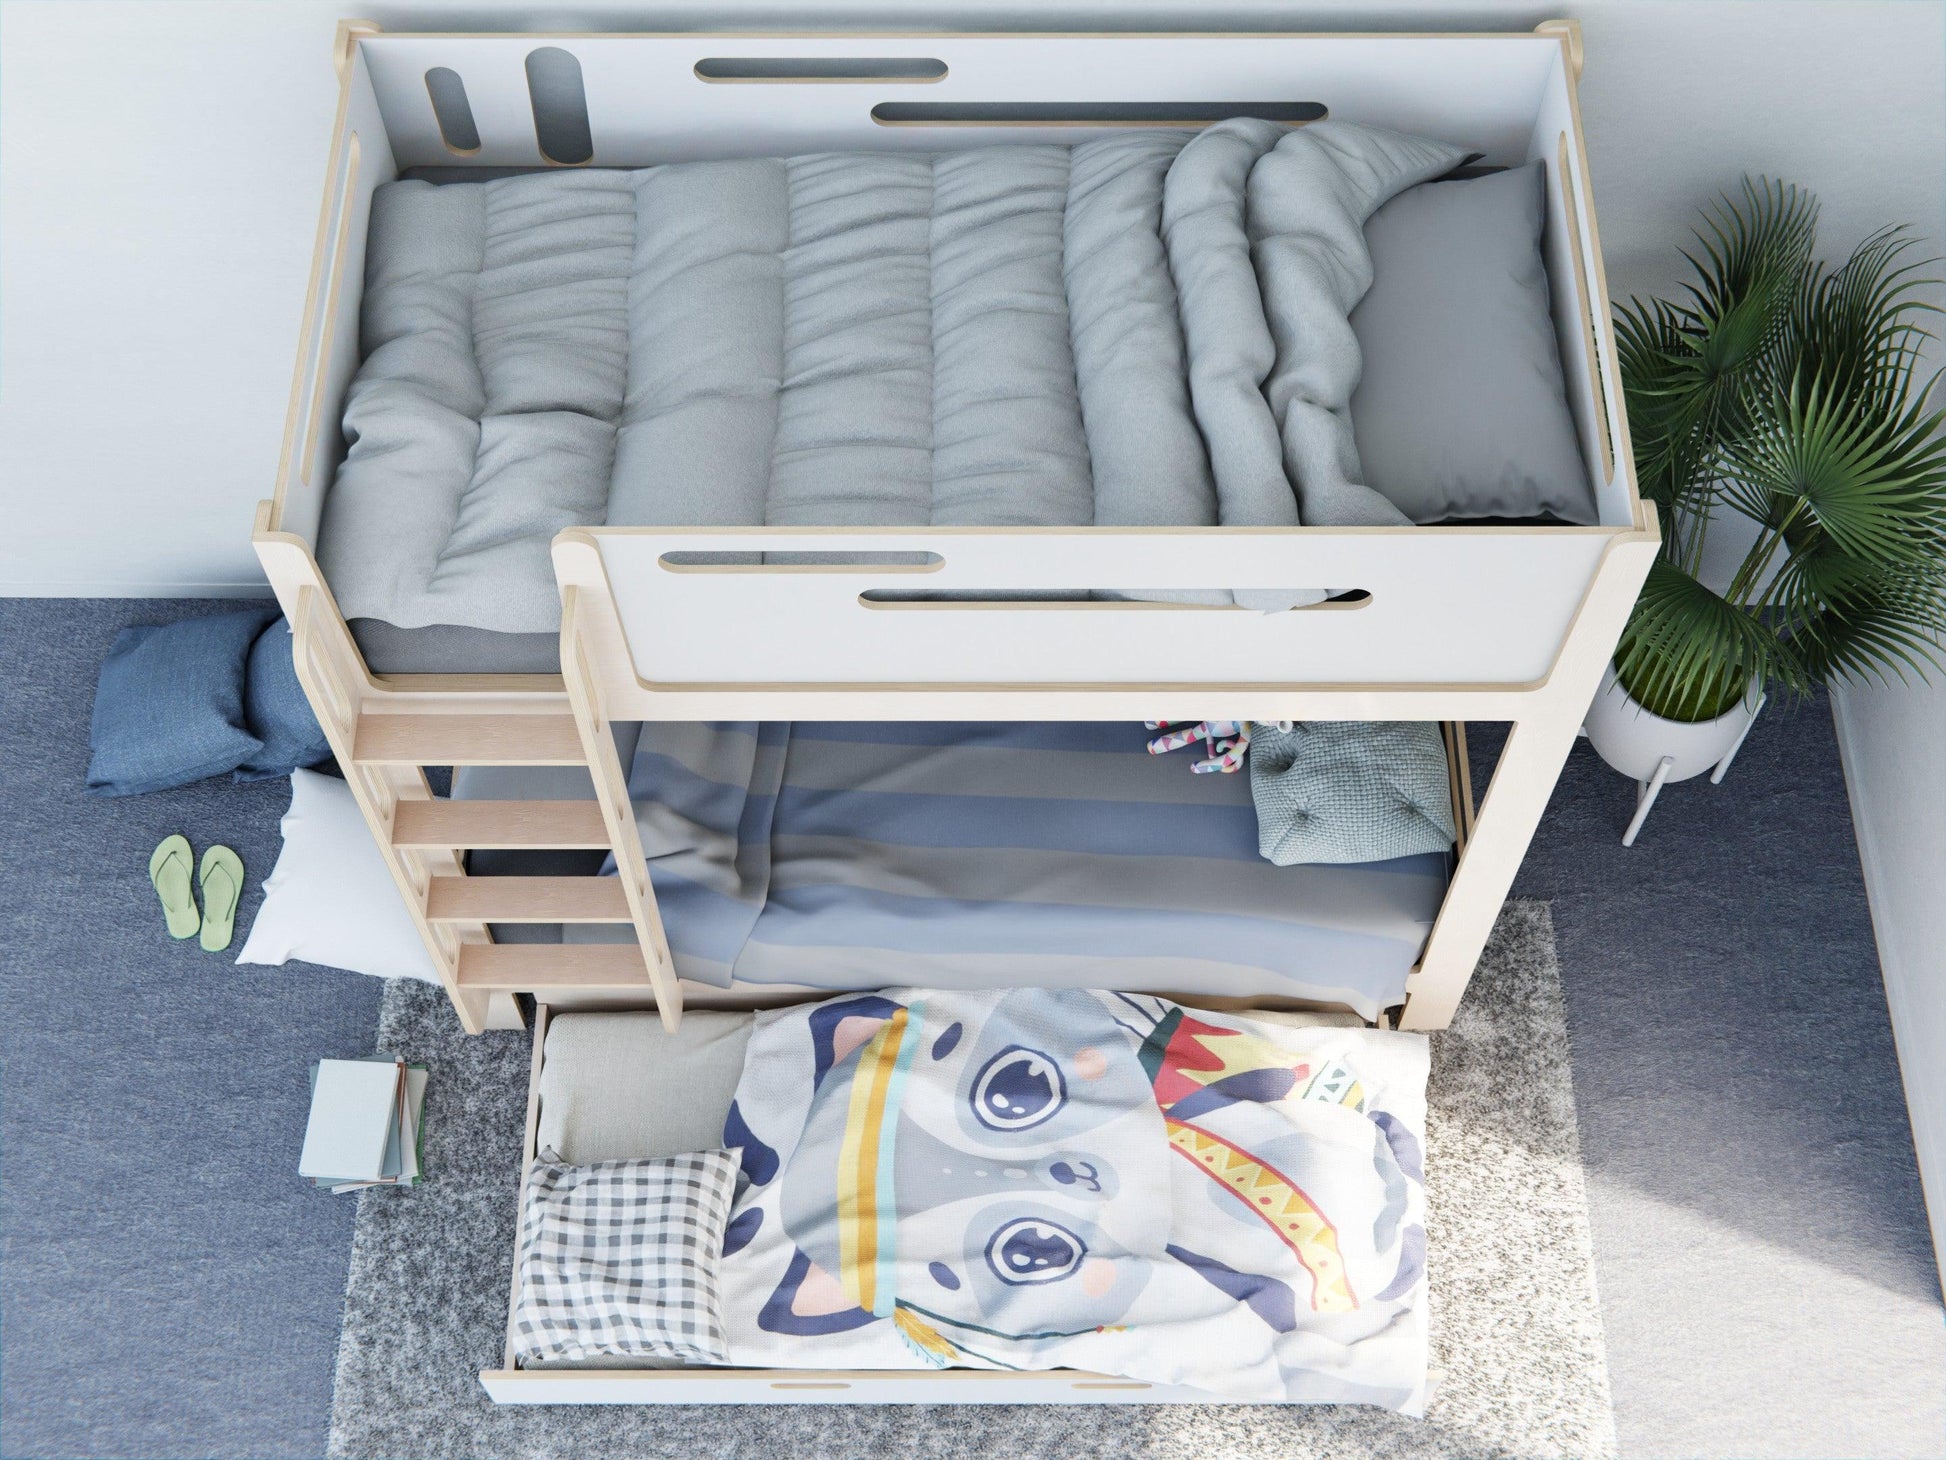 Elevated beds like no other! Our plywood bunk beds feature study sets, drawers, in white.